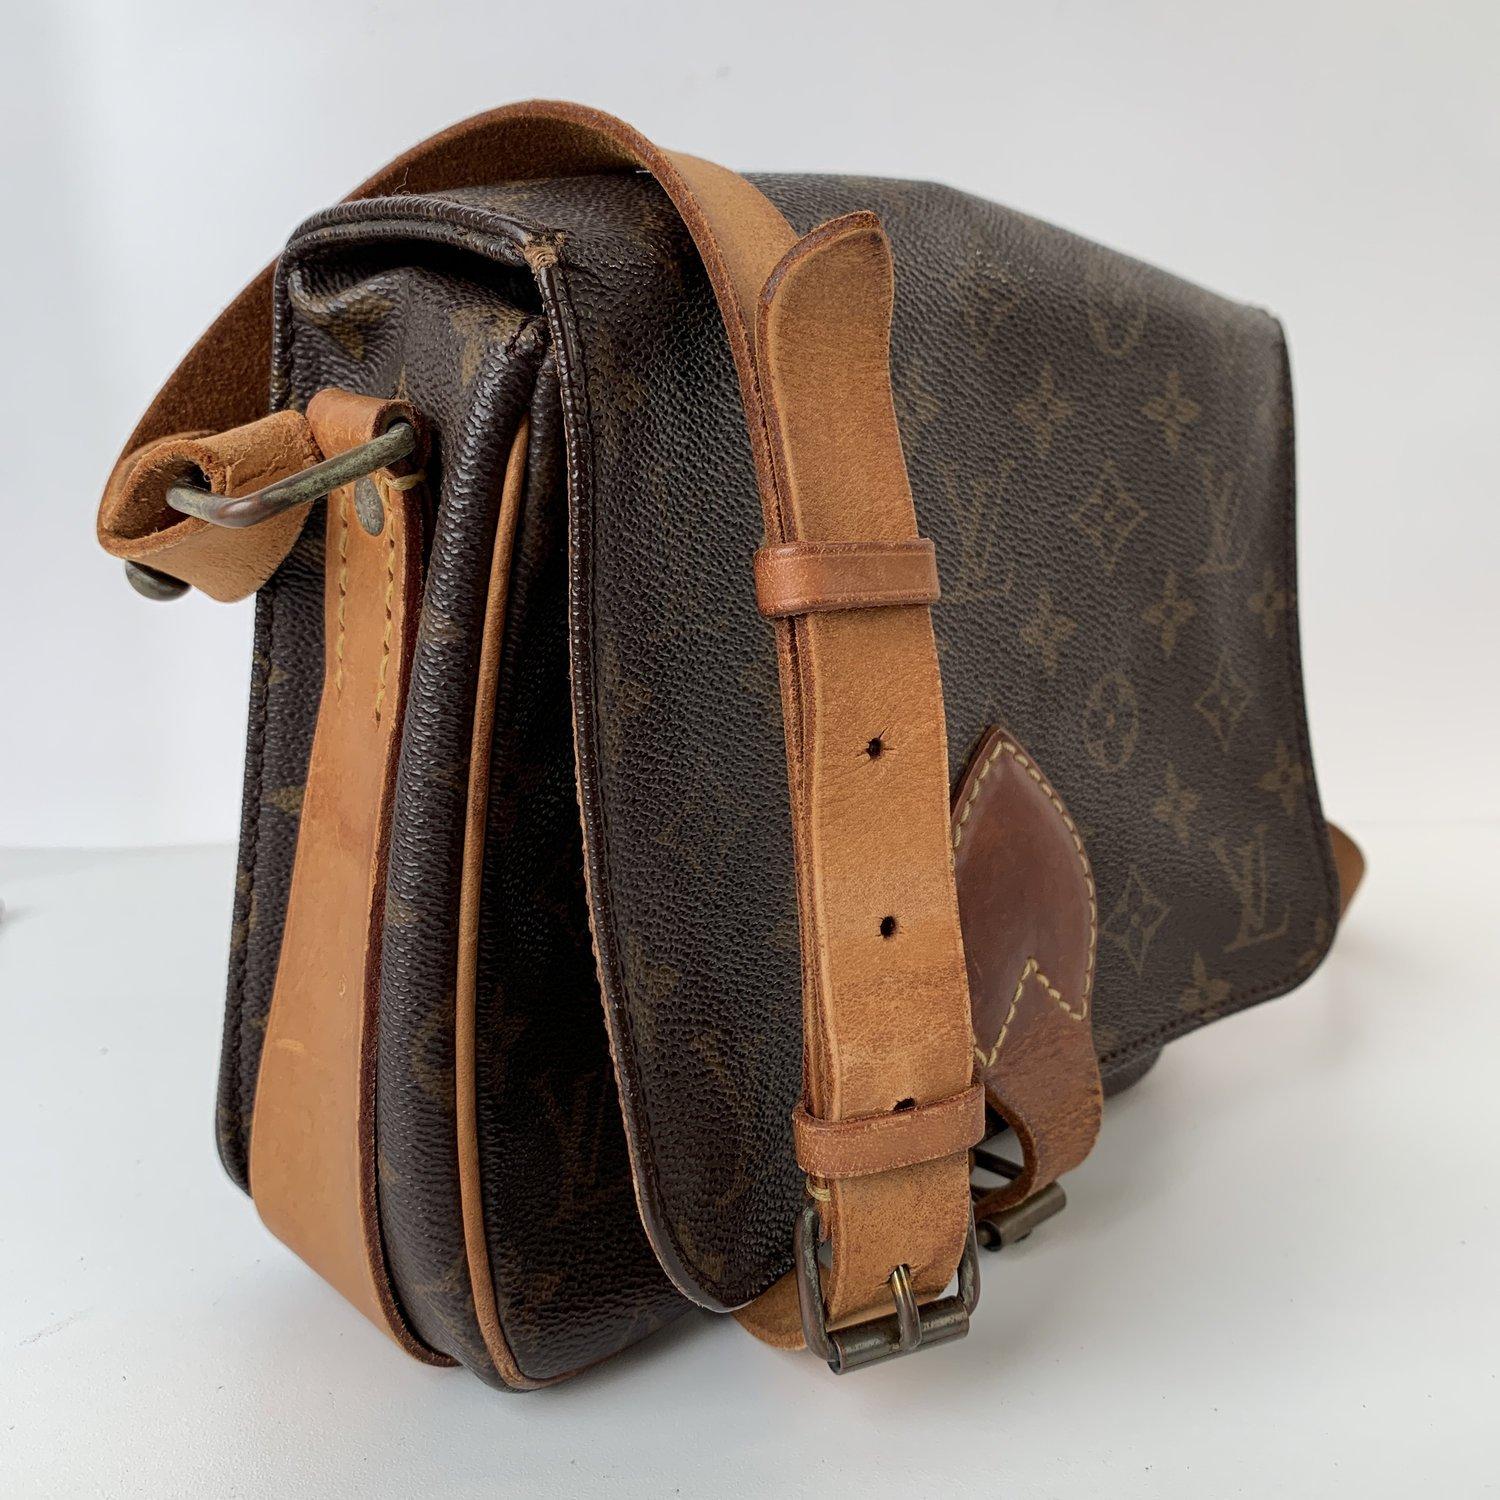 MATERIAL: Canvas COLOR: Brown MODEL: Cartouchiere MM GENDER: Women SIZE: Small Condition B :GOOD CONDITION - Some light wear of use - READ CAREFULLY the condition description, and do ask us for further details or pictures if you have any doubts